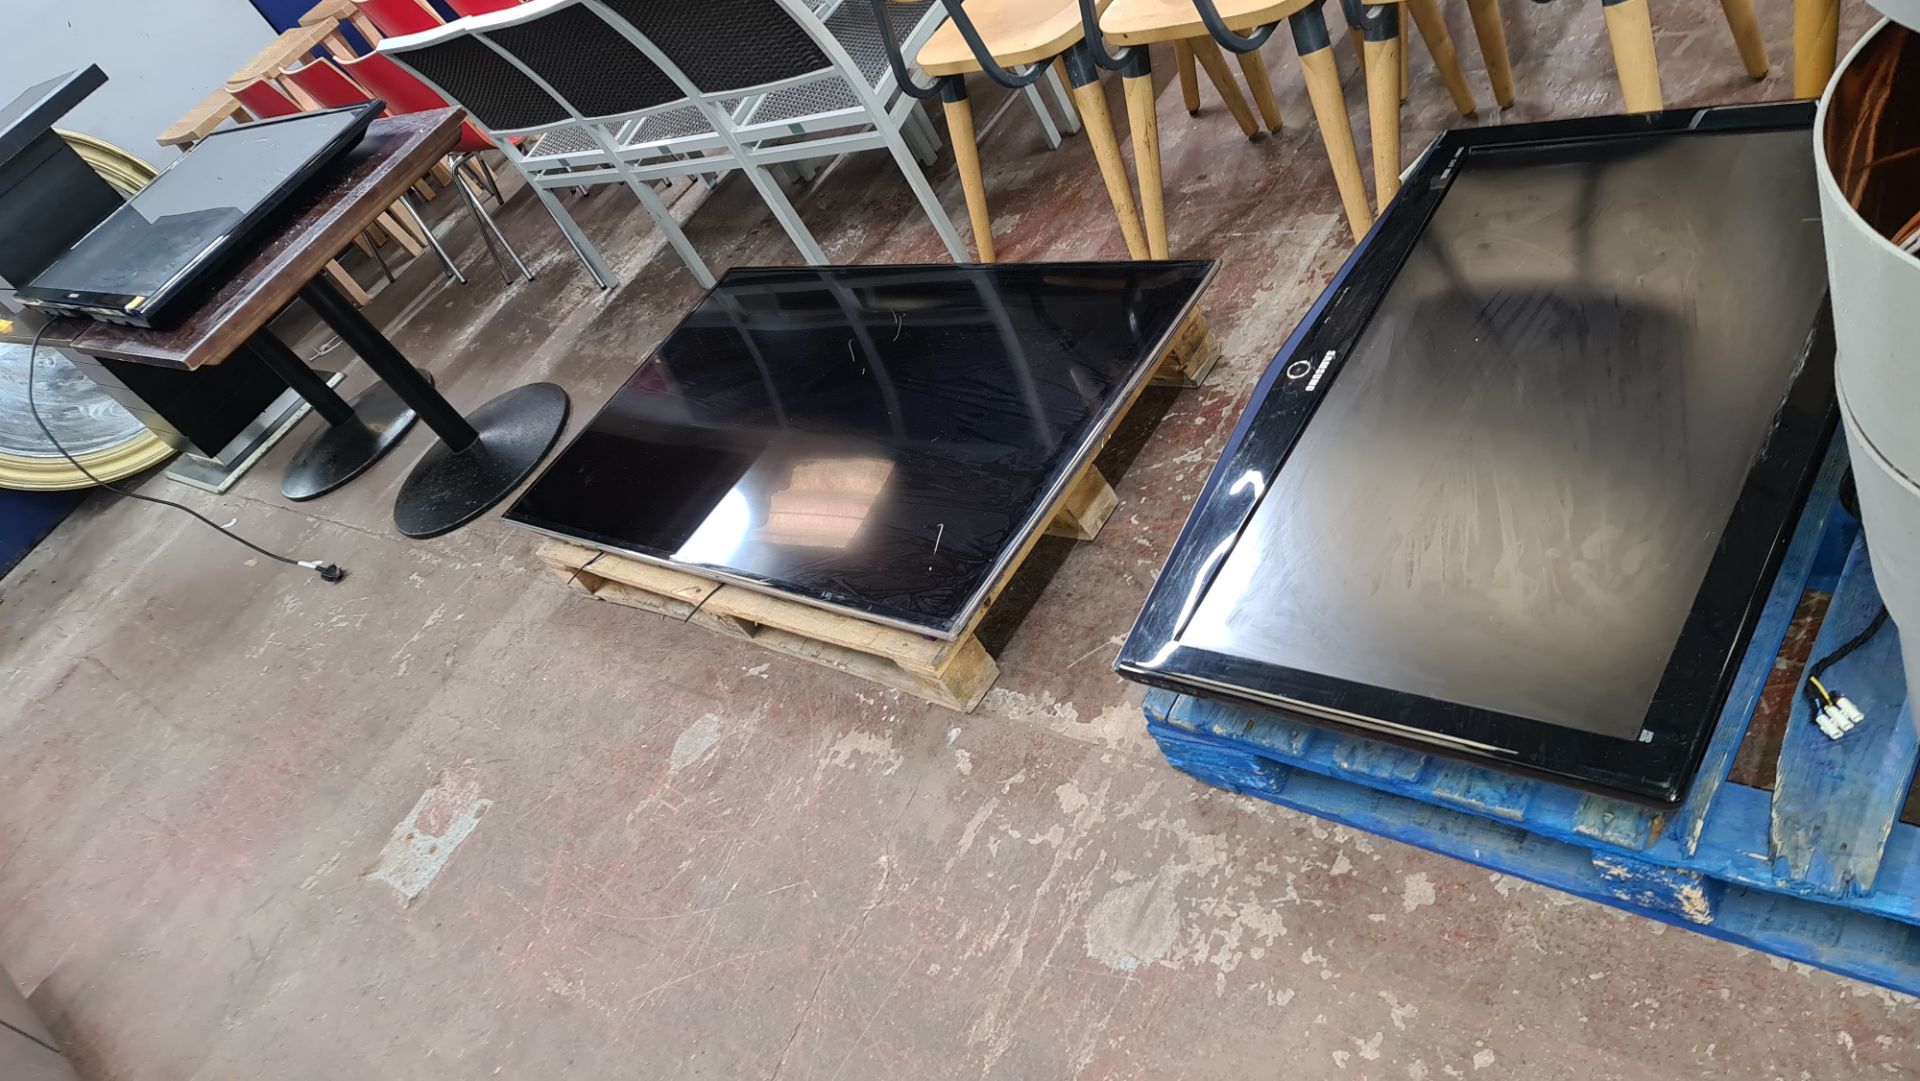 3 off assorted flat panel TVs - no remotes, brackets or other ancillaries